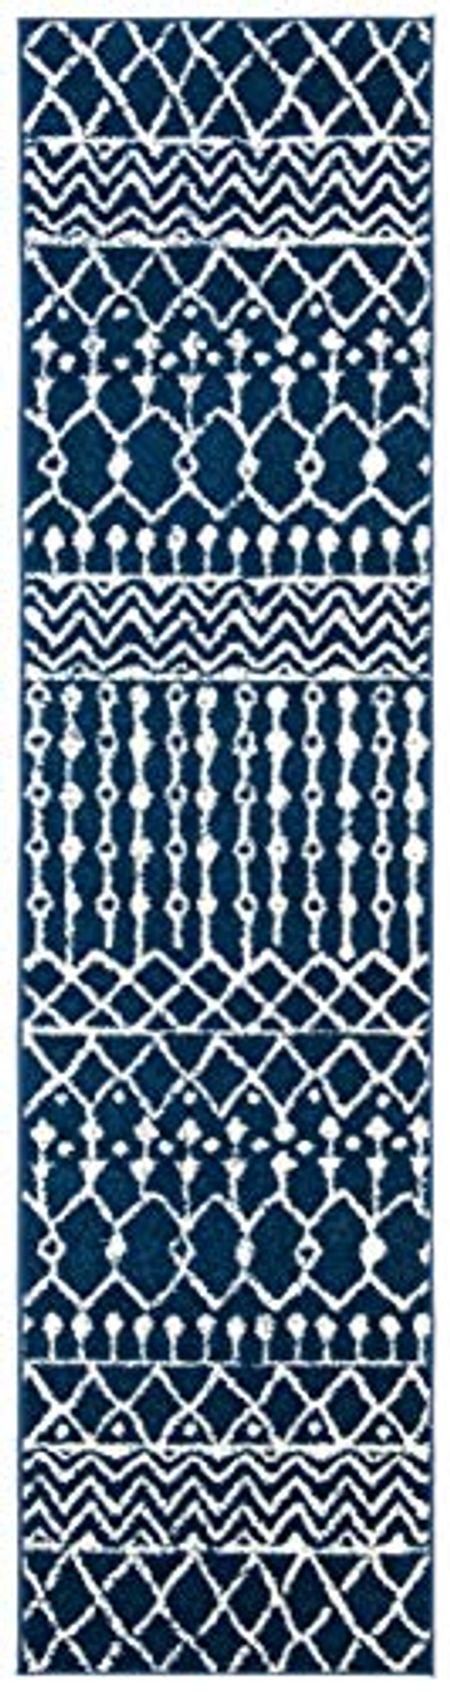 SAFAVIEH Tulum Collection 2' x 11' Navy/Ivory TUL270N Moroccan Boho Distressed Non-Shedding Living Room Bedroom Runner Rug